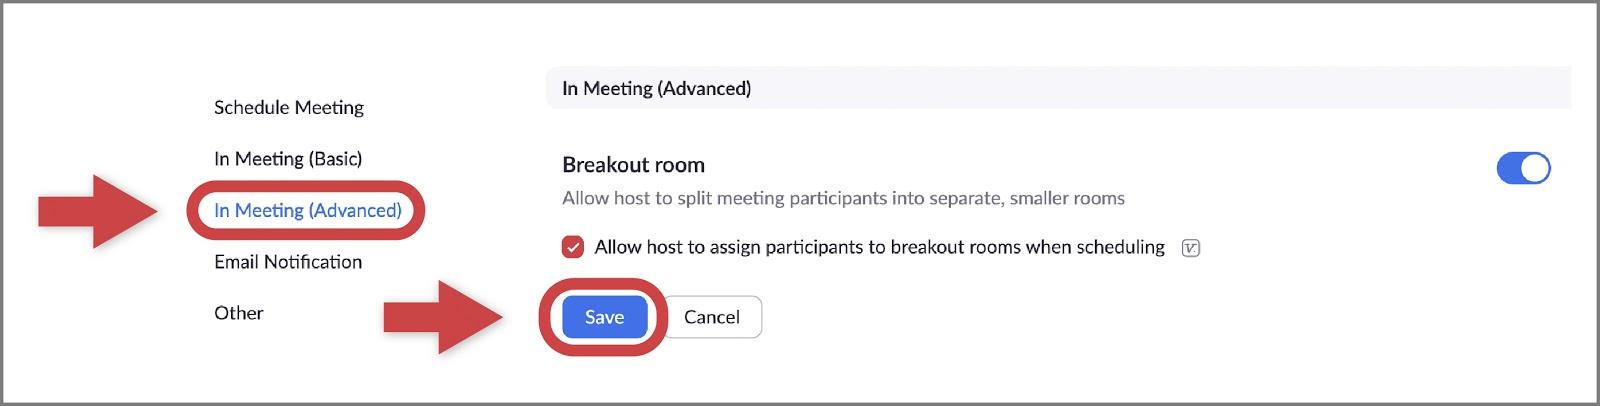 Zoom portal with arrow pointing to Settings > In Meeting (Advanced) 